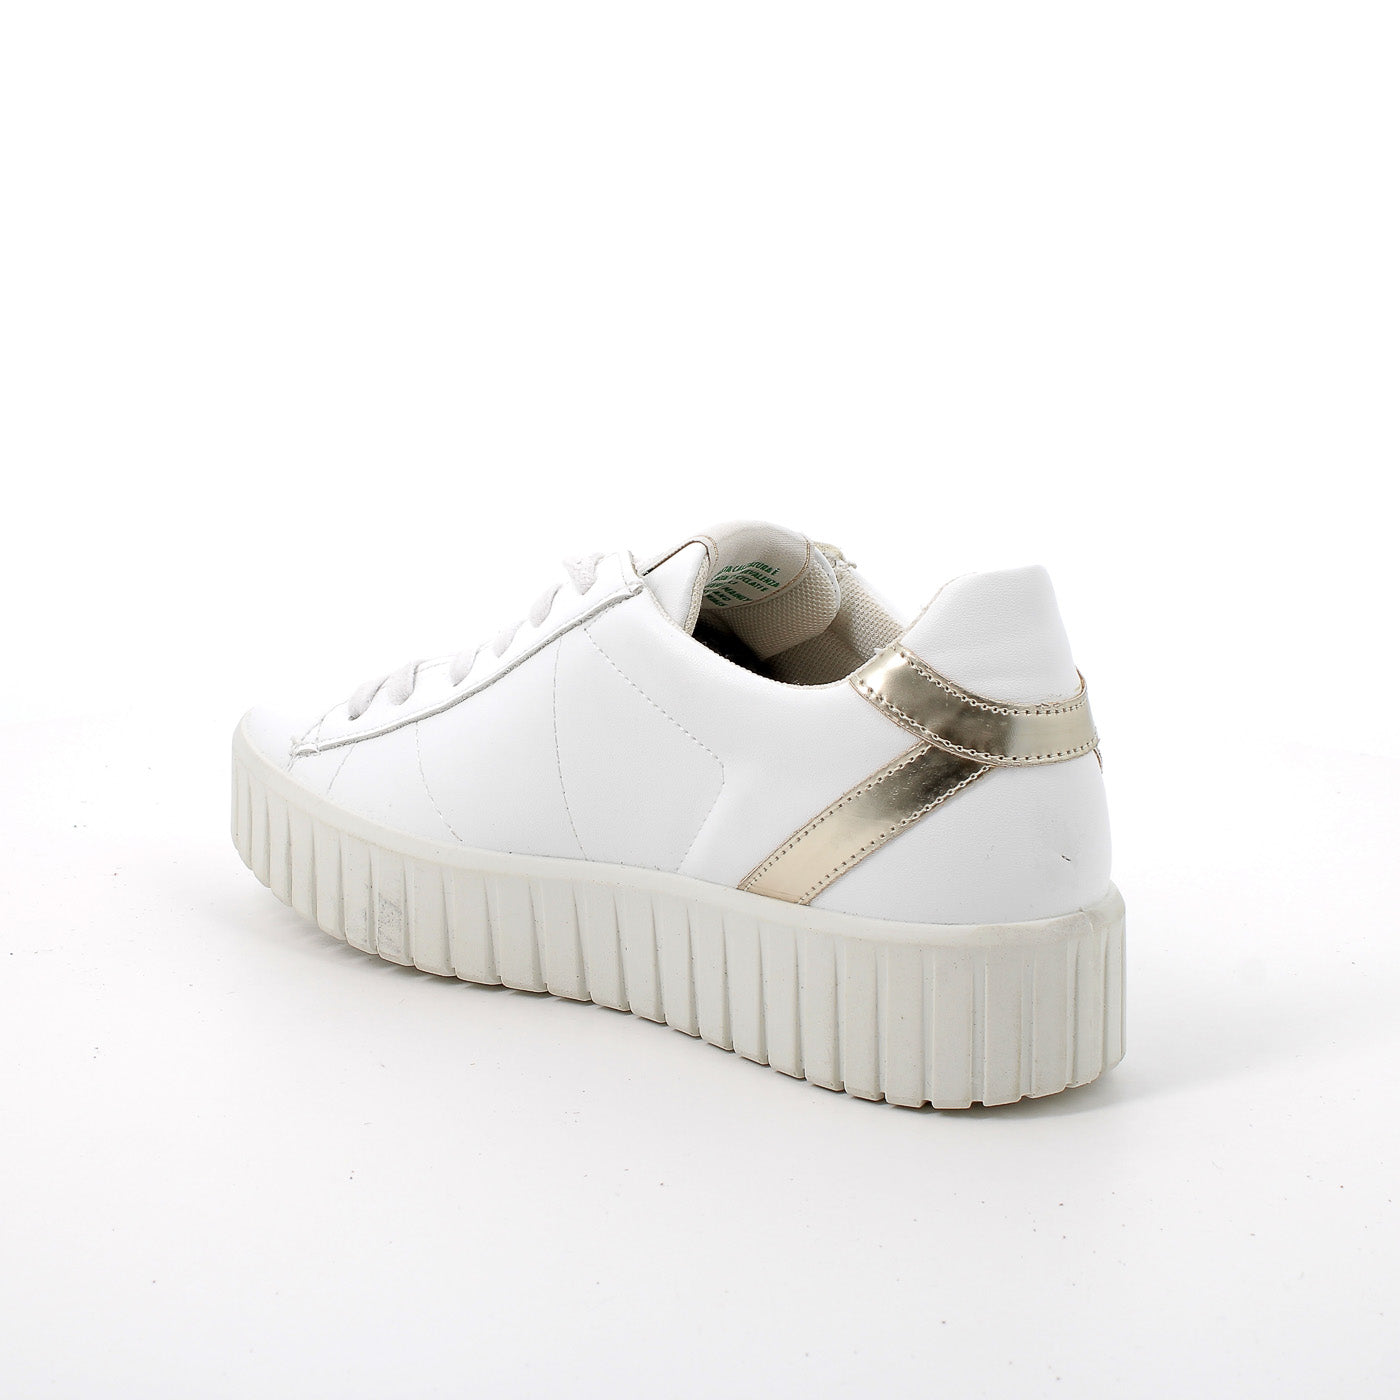 IGI & Co Green Collection Vegan Leather Runners - Sustainable Italian Sneakers